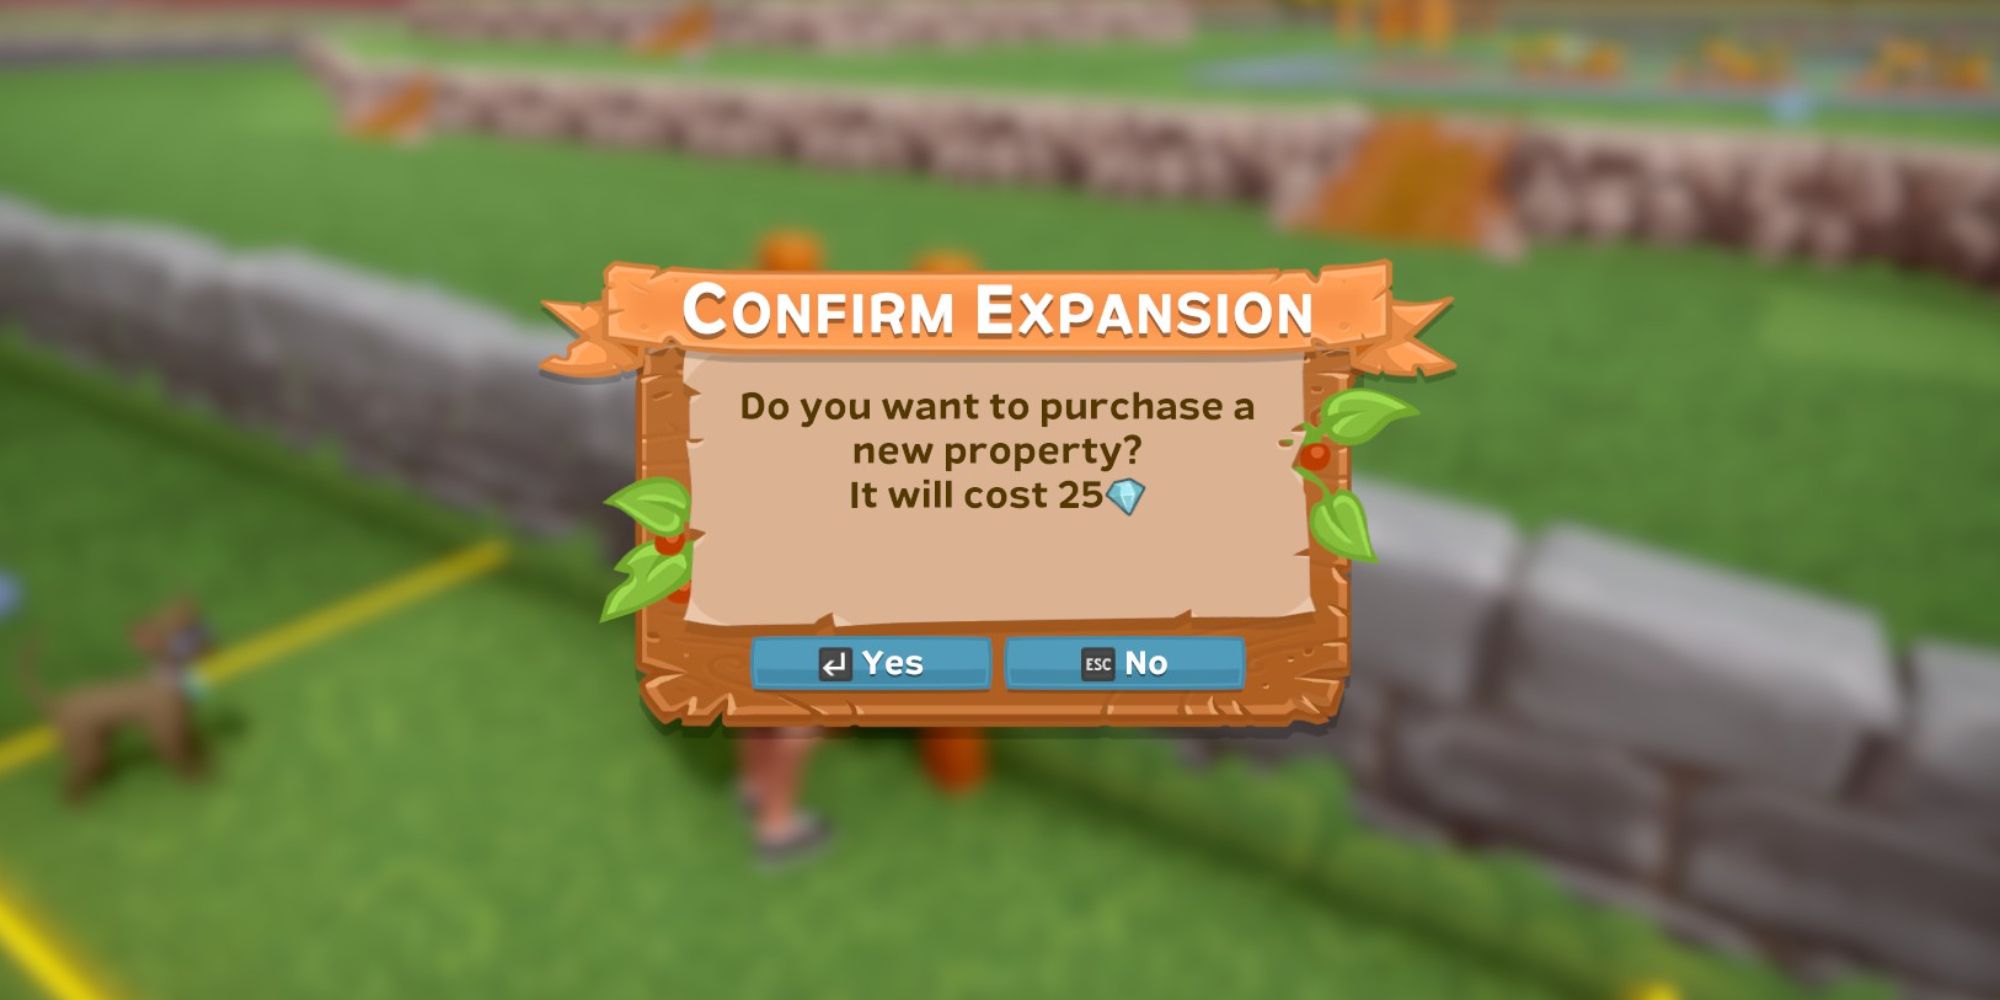 Farm Together confirm expansion message